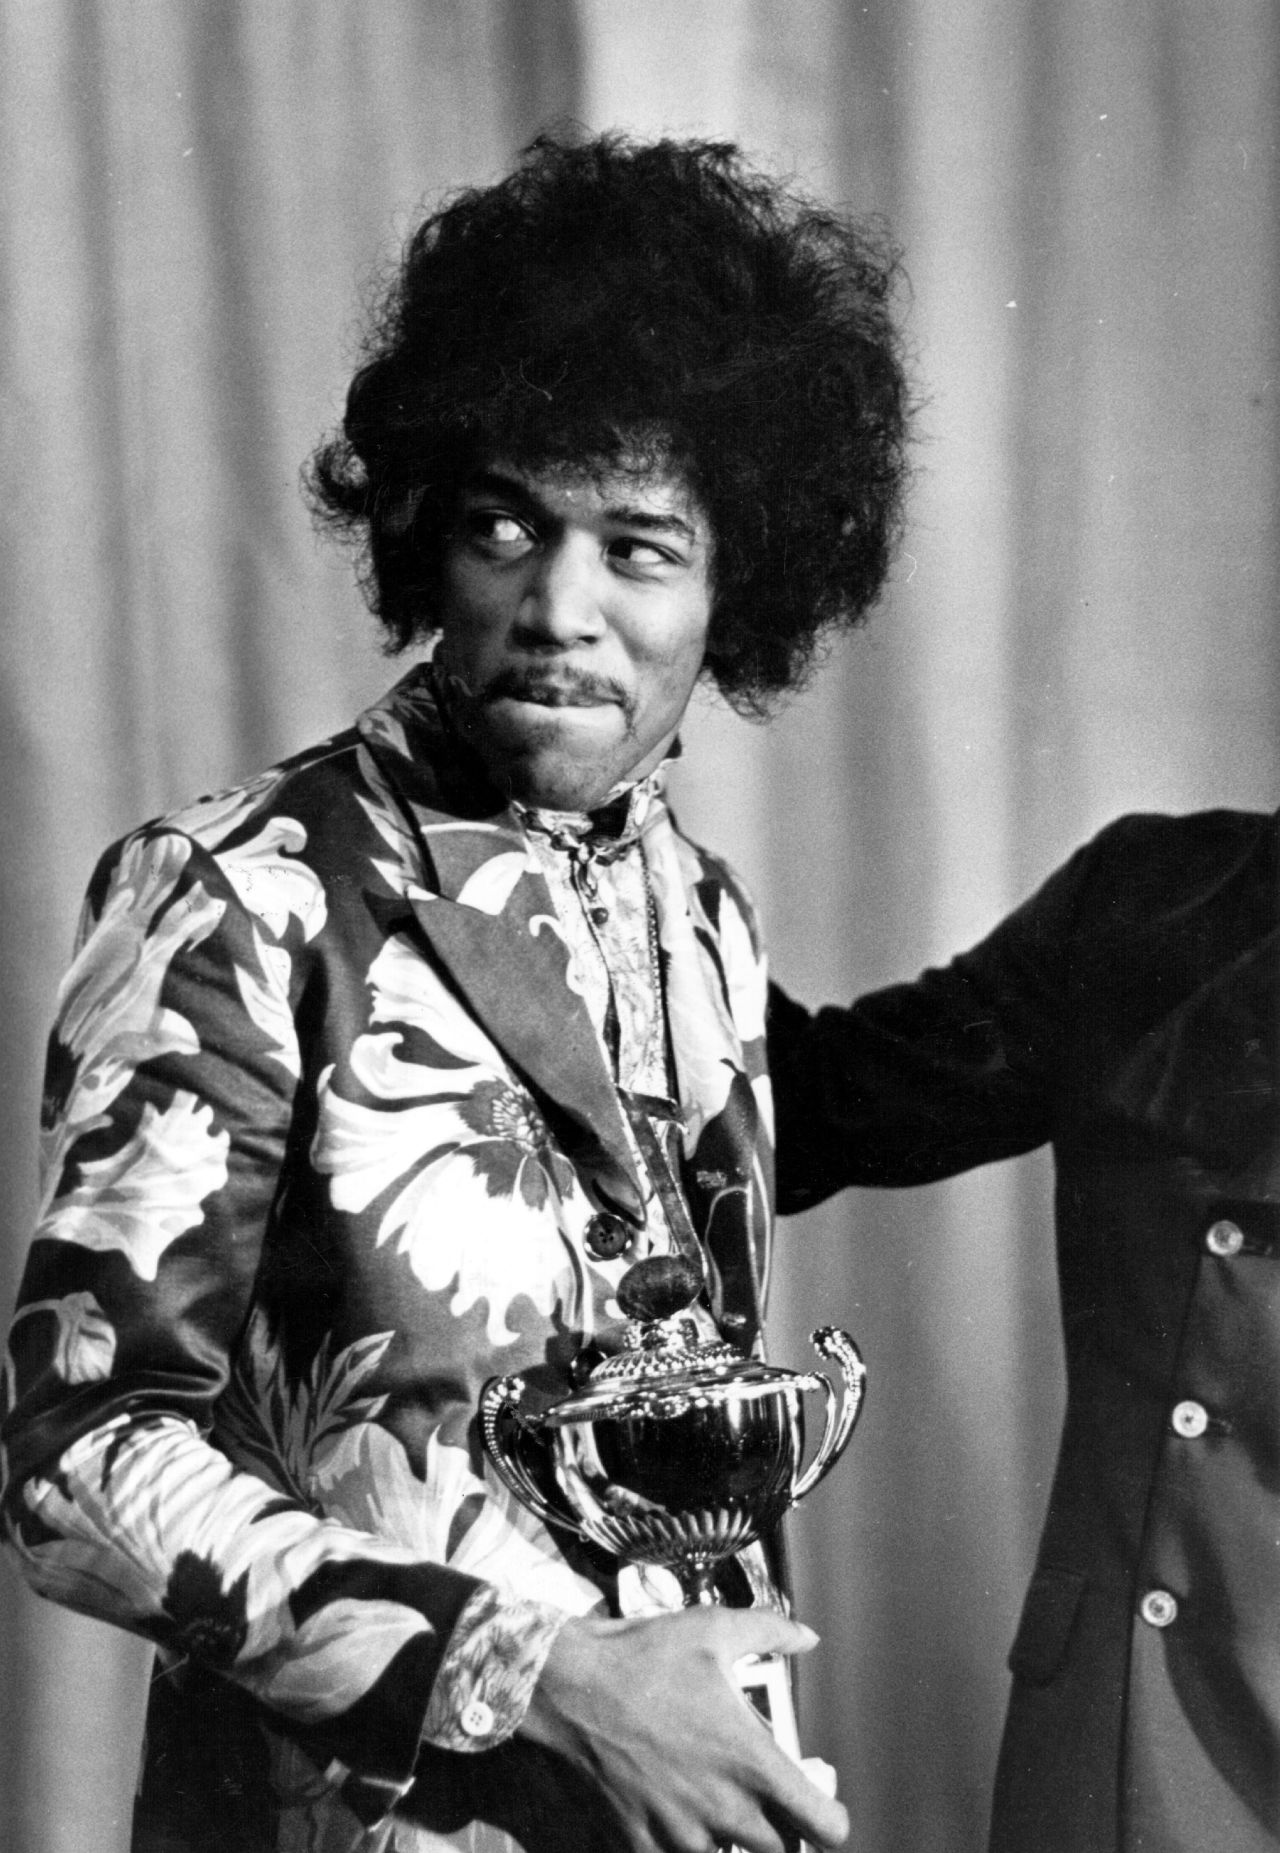 Seen here in October 1967, Hendrix receives an award from Radio One DJ Jimmy Savile. The Experience's first single, "Hey Joe," was released that year and was a phenomenal hit in the U.K. Another smash, "Purple Haze," and the group's double-platinum first album "Are You Experienced?" soon followed.